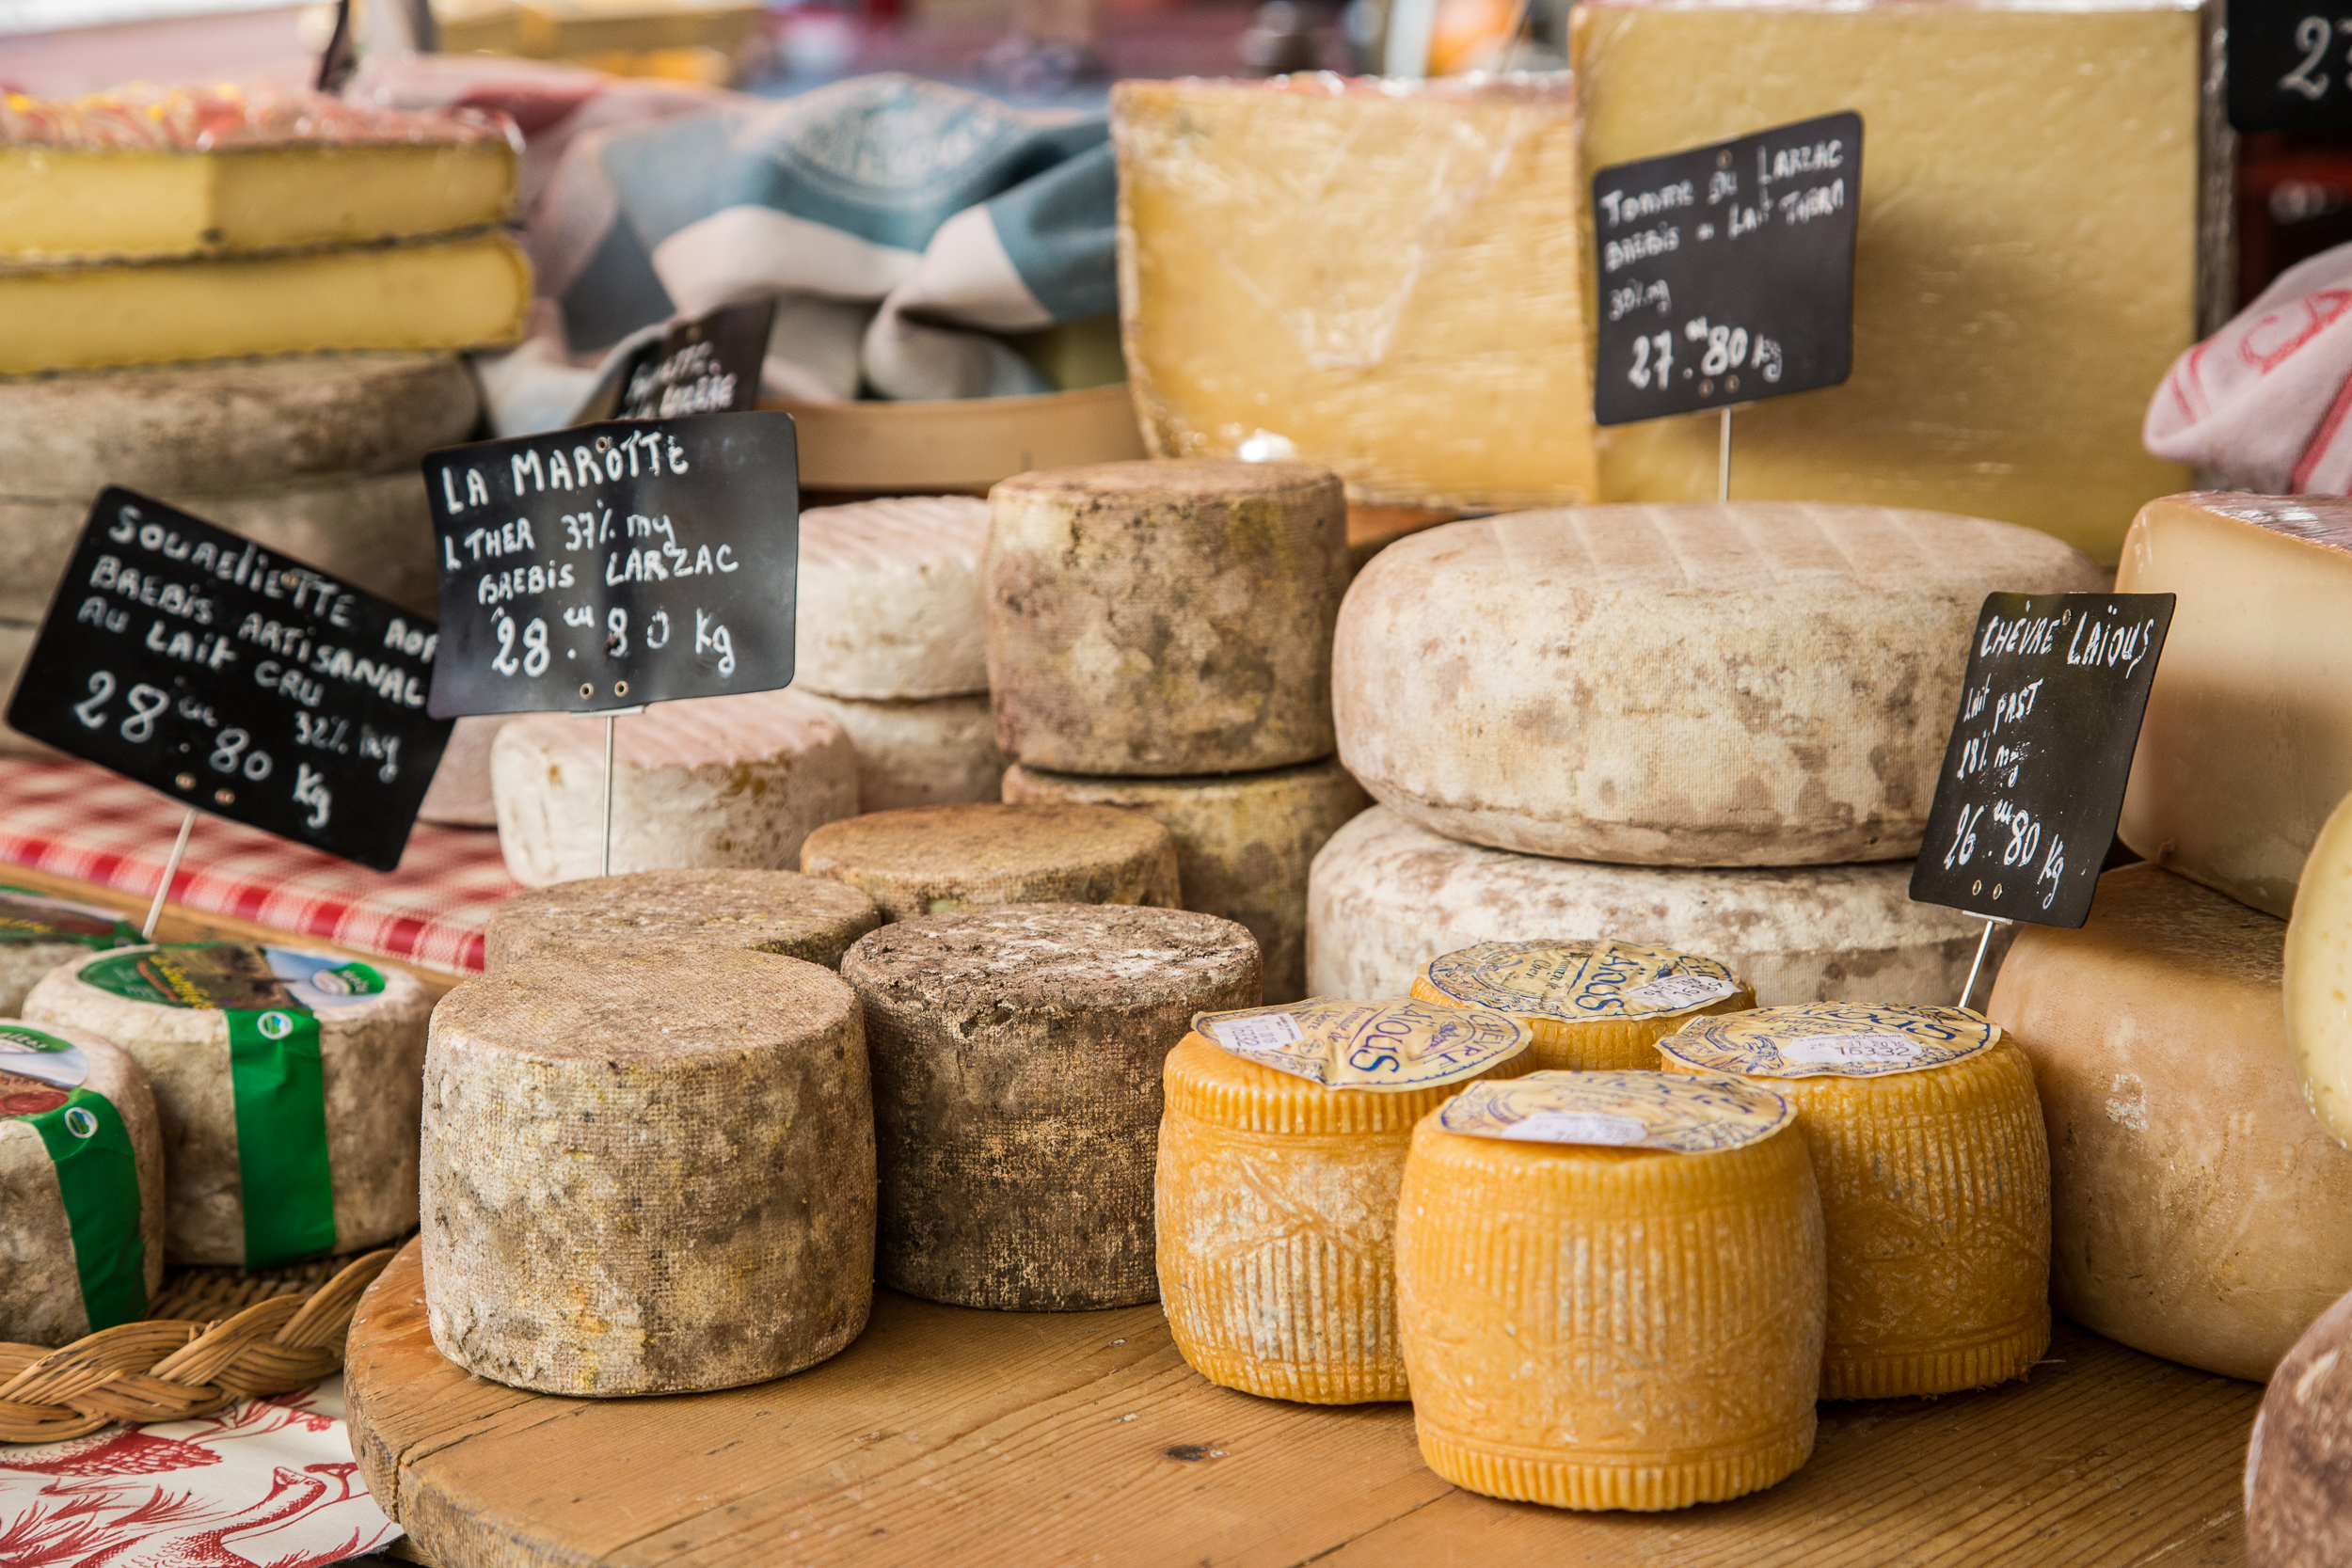 France’s legendary love of cheese